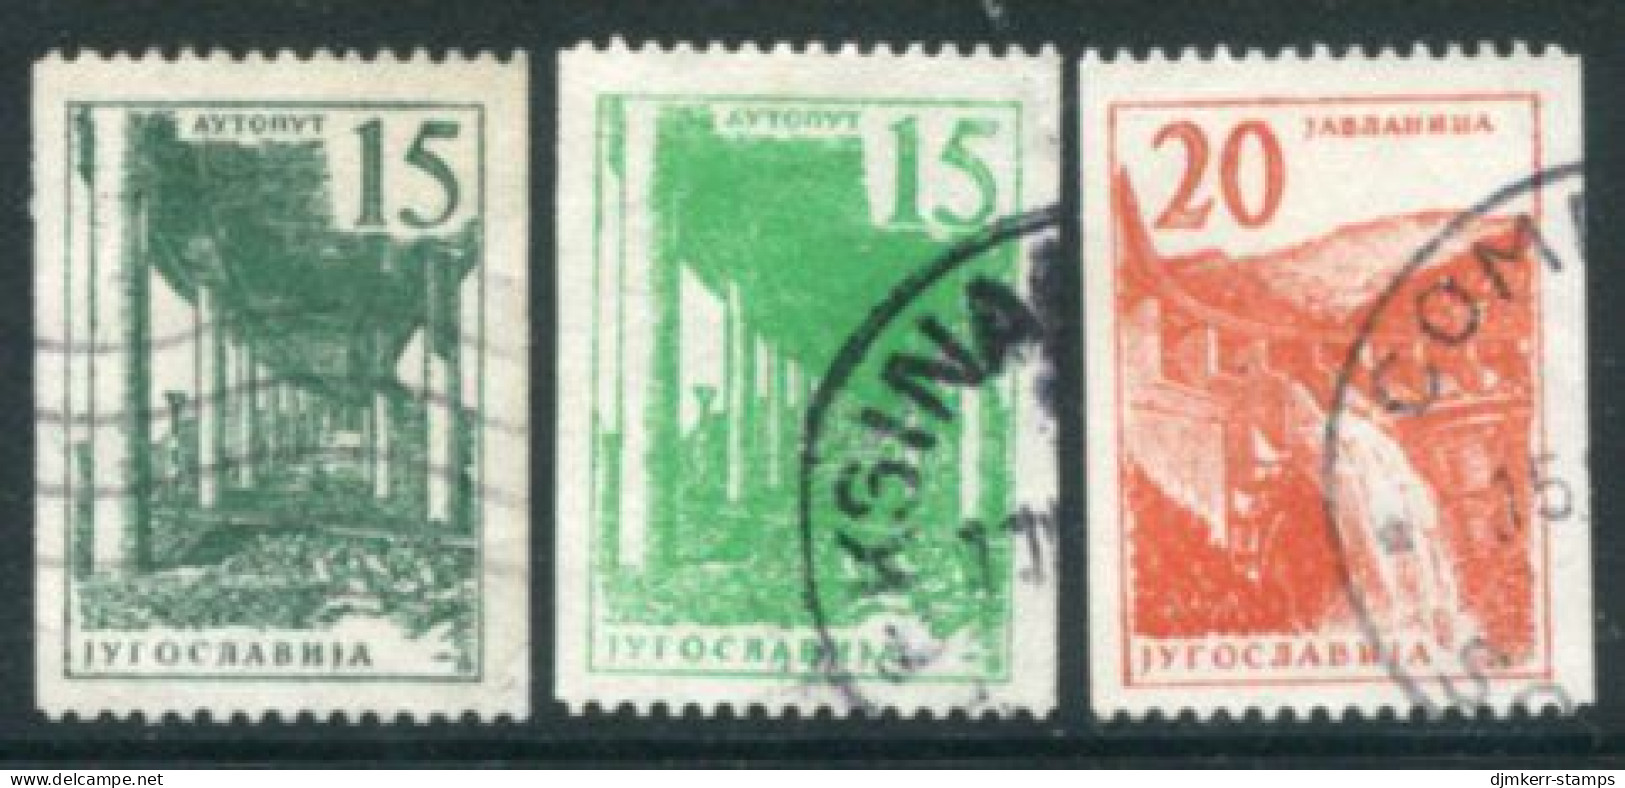 YUGOSLAVIA 1959 Definitive Coil Stamps  Used.  Michel 898a,b-899 - Used Stamps